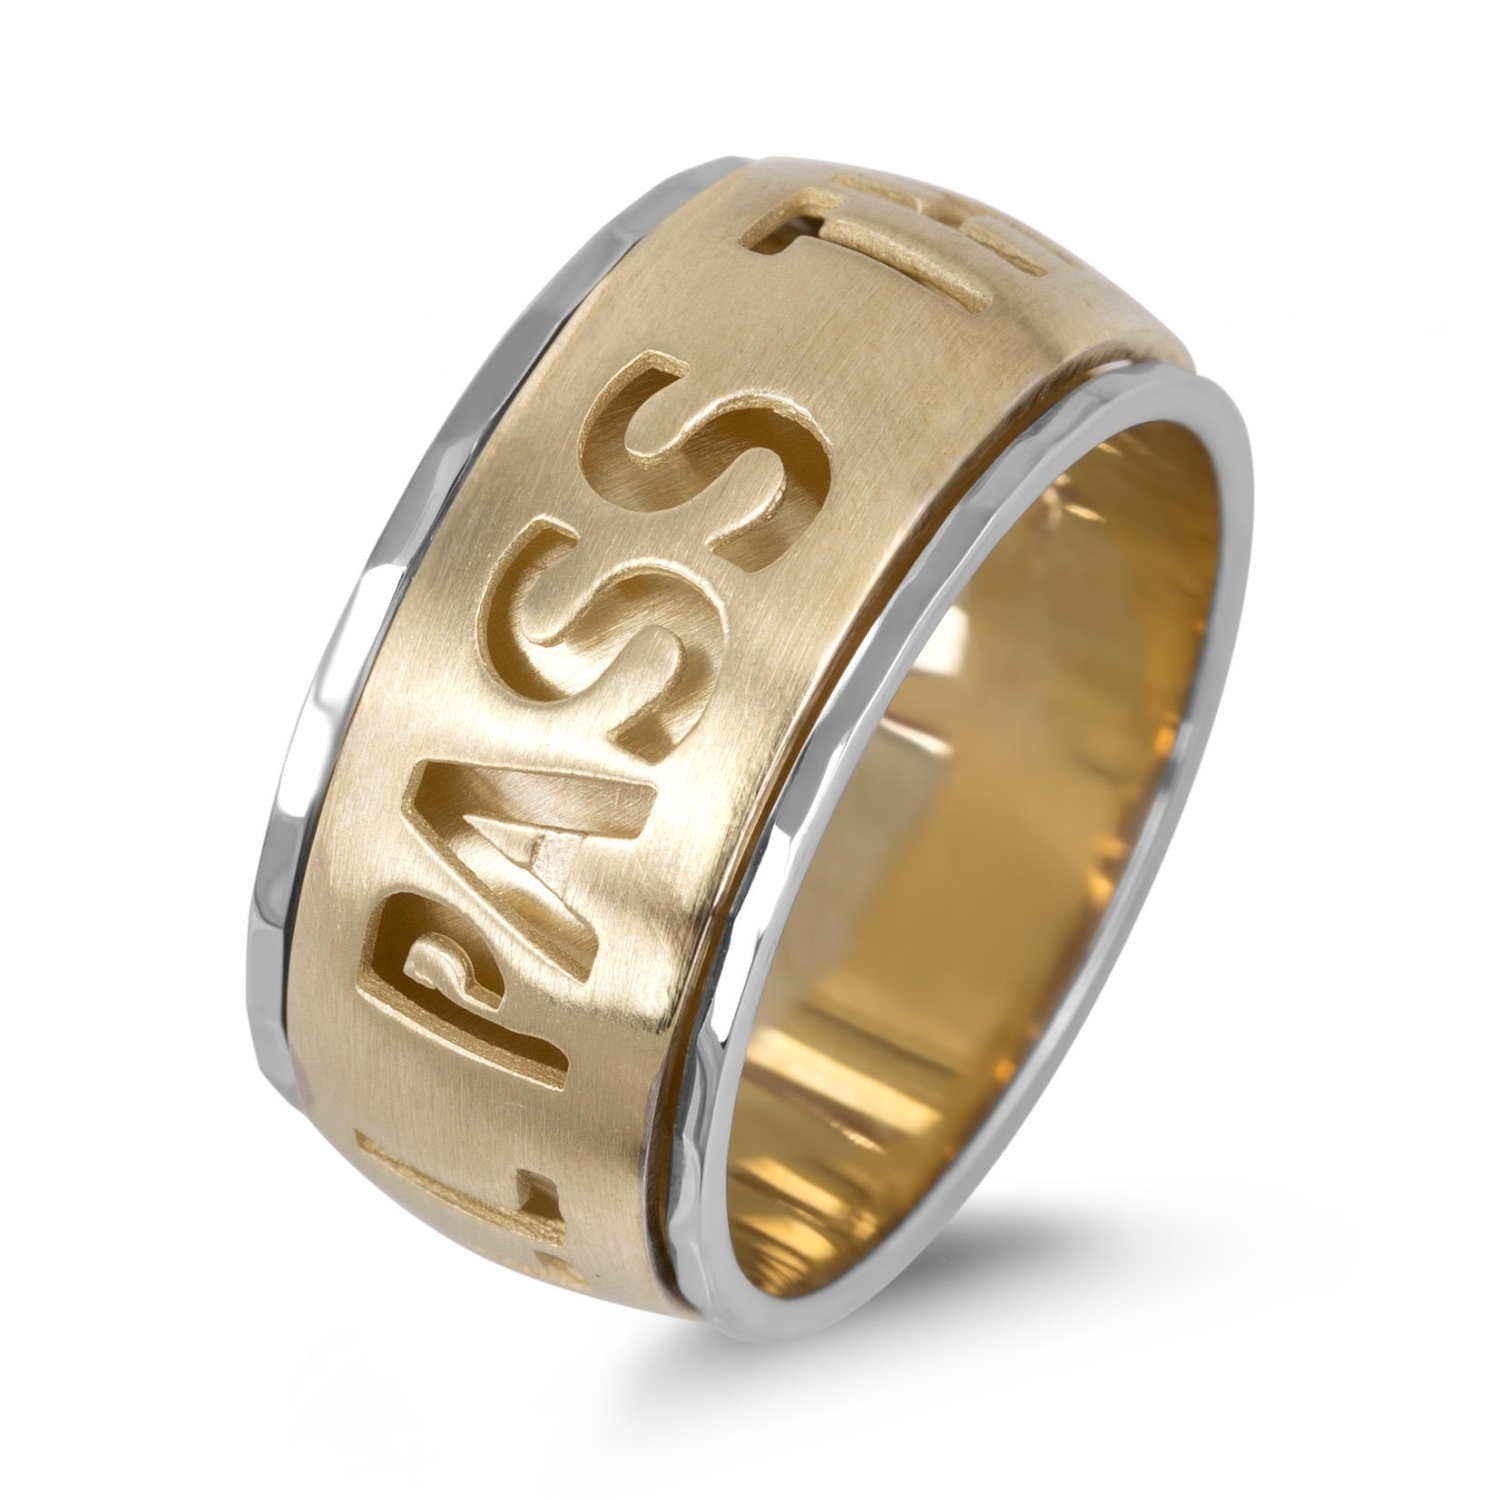 14K Gold Ring with "This Too Shall Pass" Spinner Band - 2